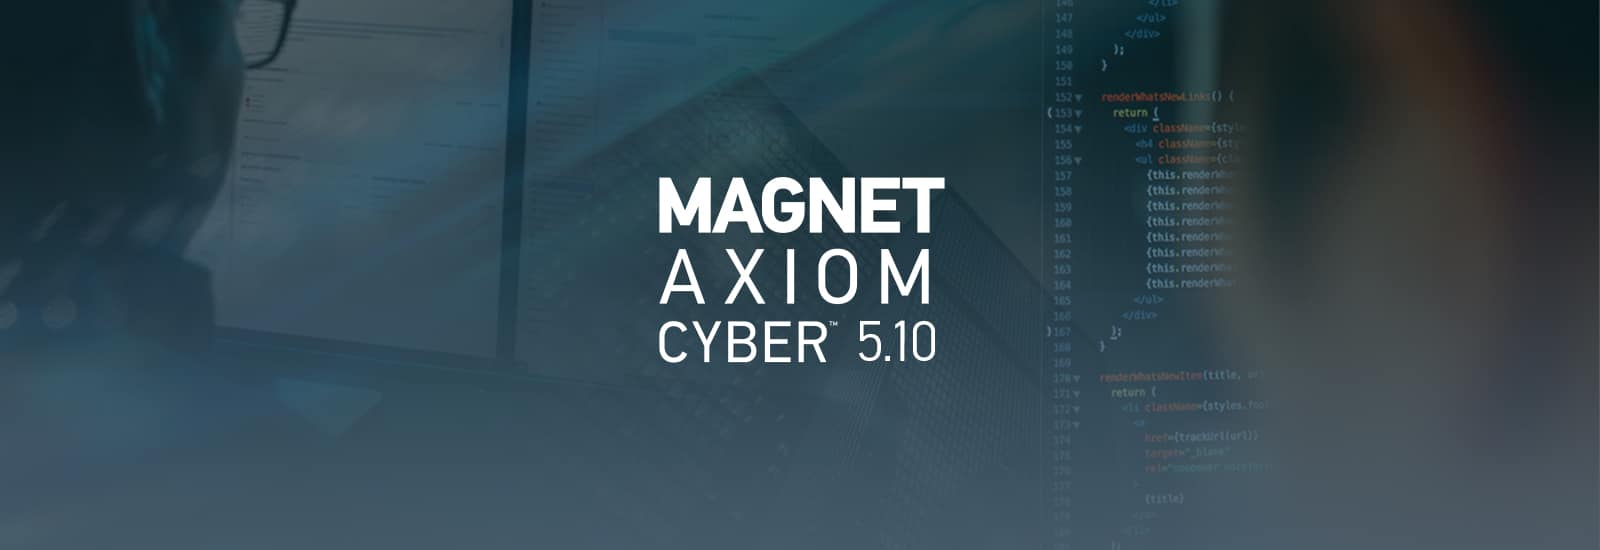 A decorative header for the Magnet AXIOM Cyber 5.10 release